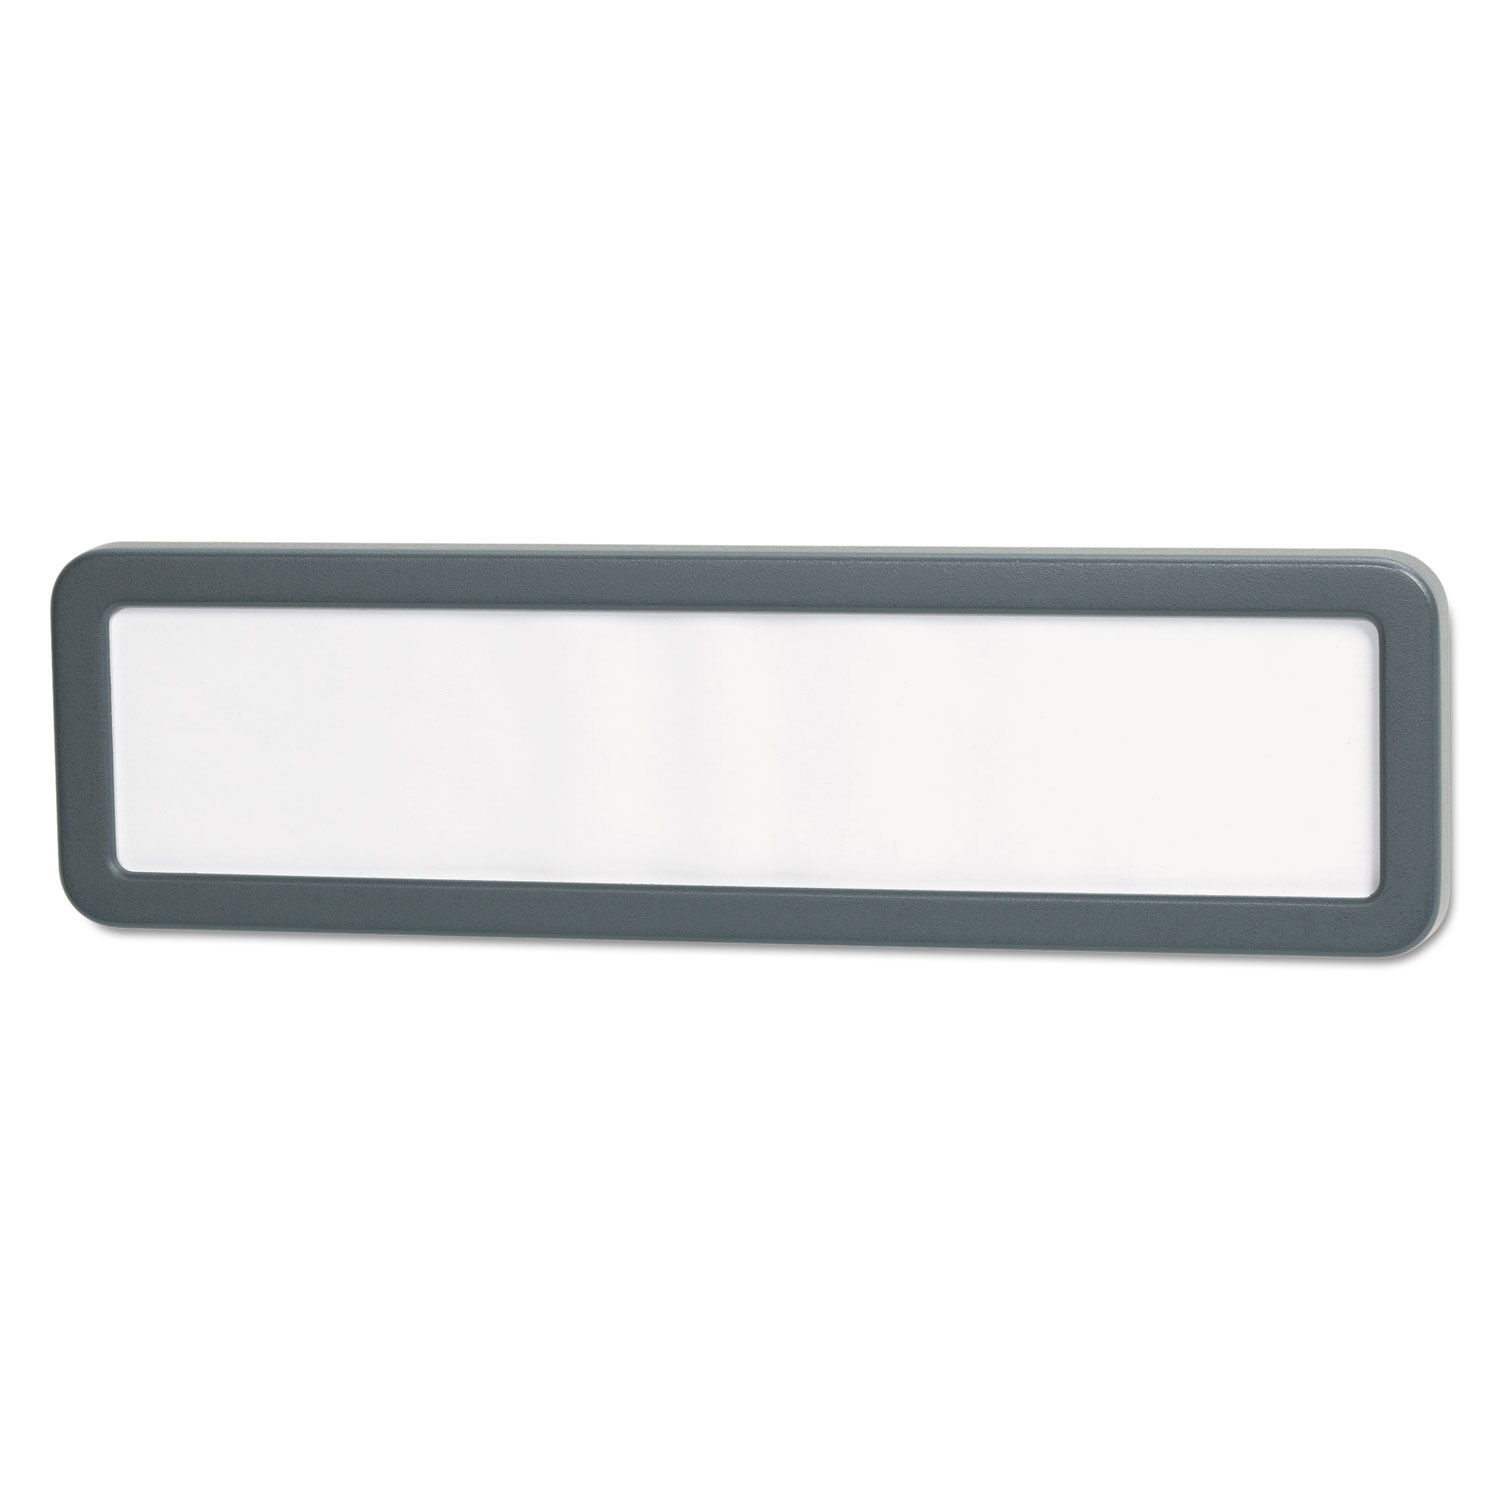 Recycled Cubicle Nameplate with Rounded Corners 9 x 2.5, Charcoal